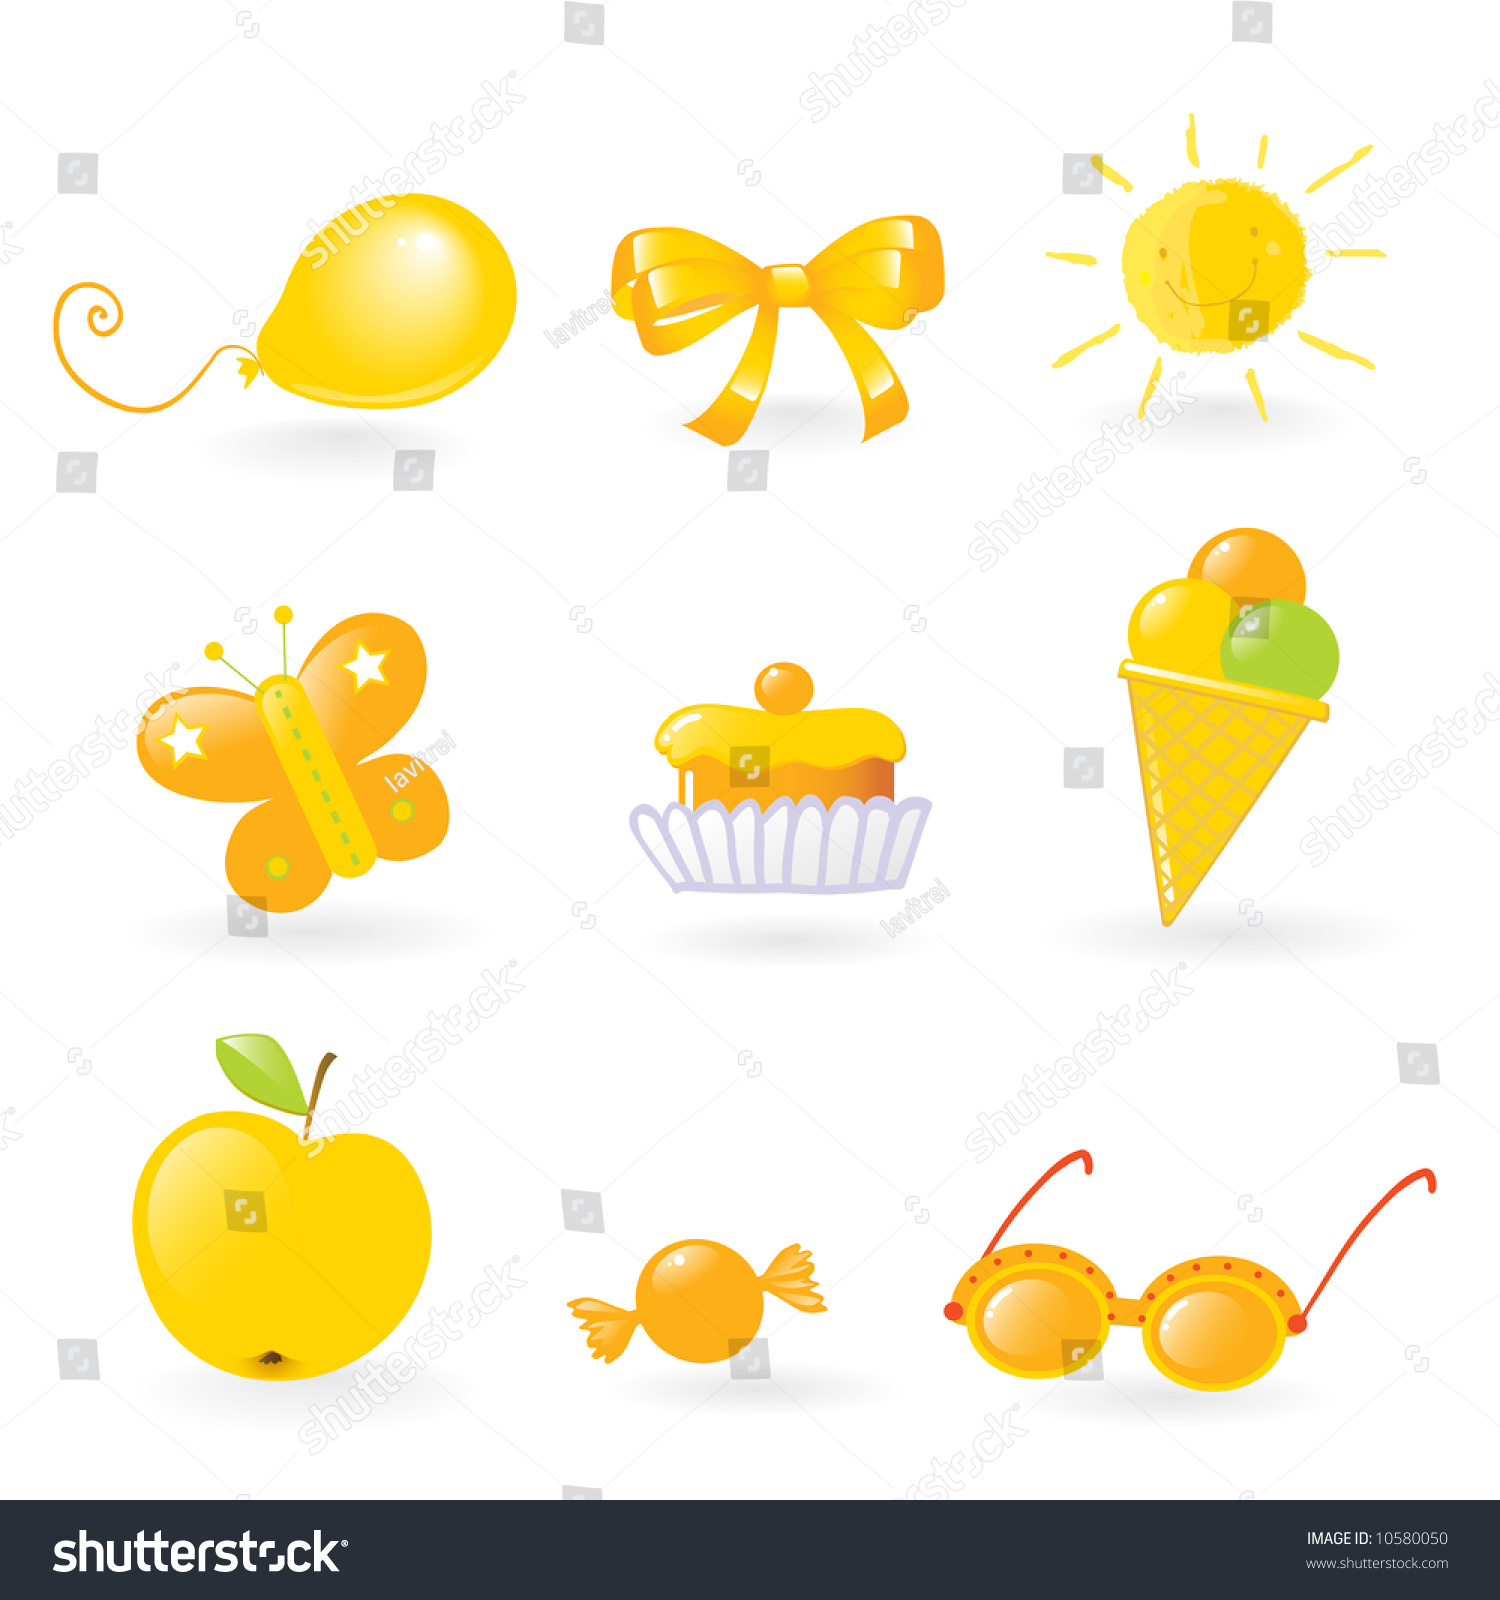 clipart yellow things - photo #8